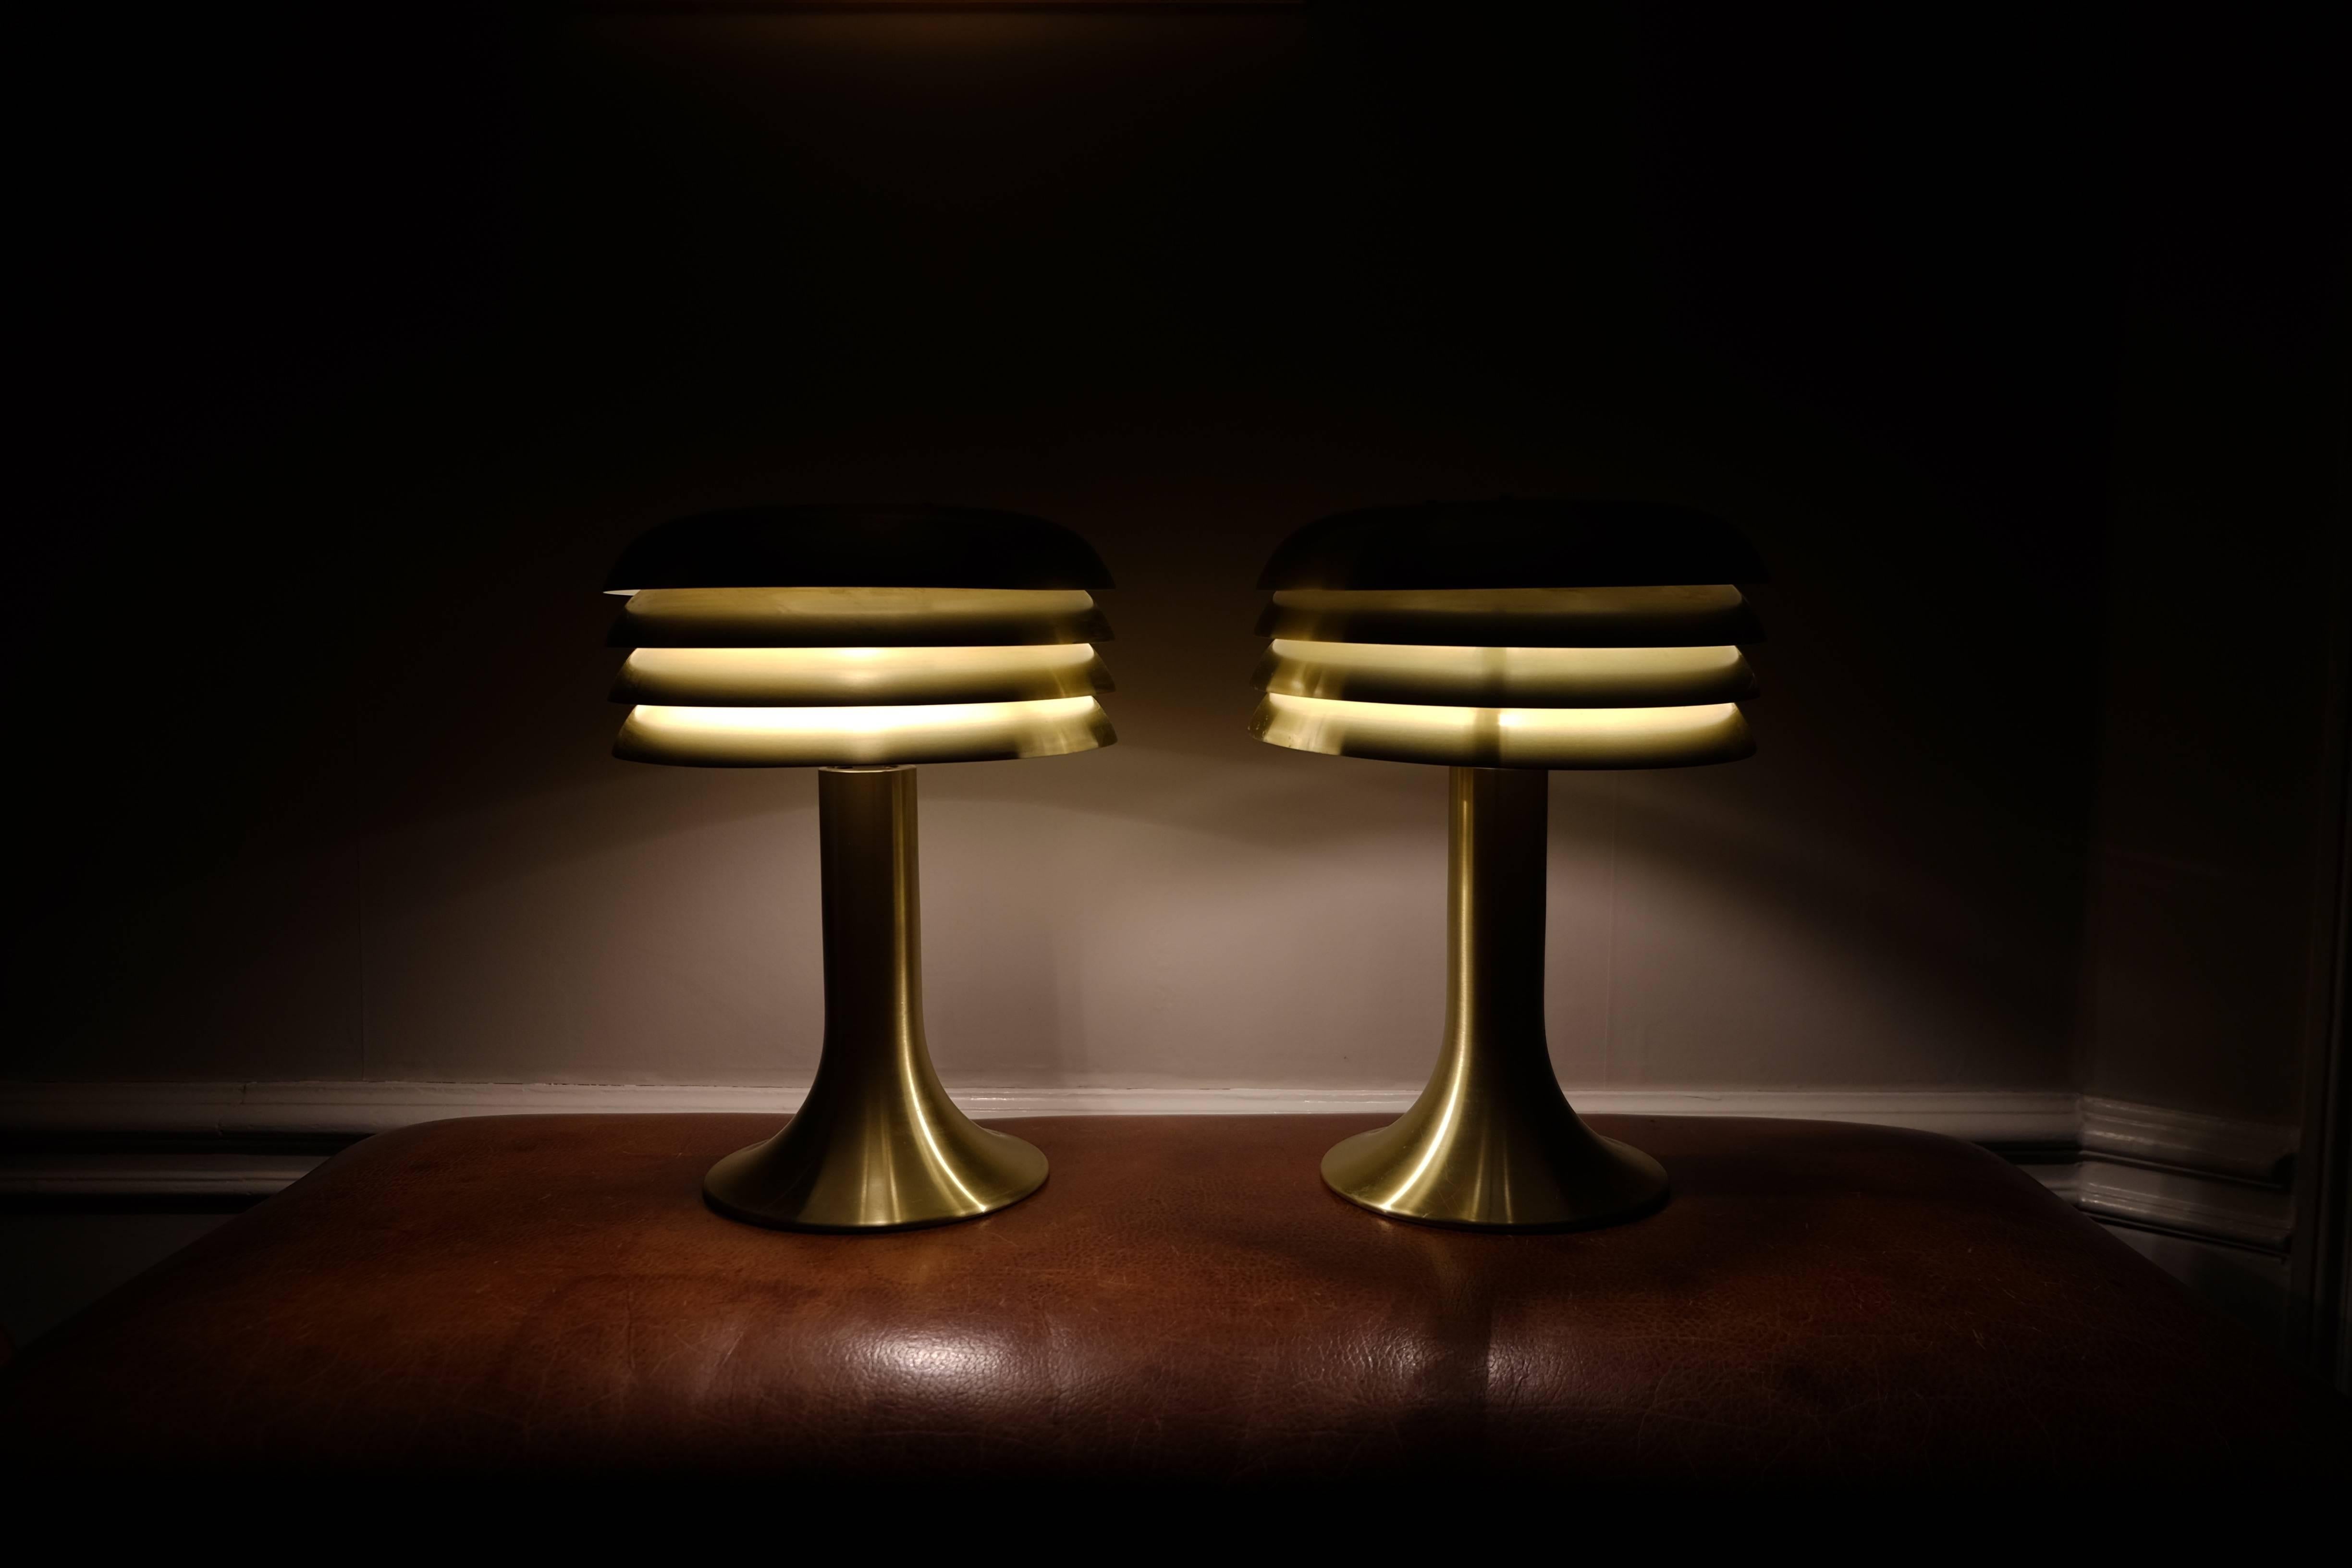 A pair of vintage Hans-Agne Jakobsson table lamps, model BN-26.
Produced by Hans-Agne Jakobsson AB in Markaryd, Sweden.